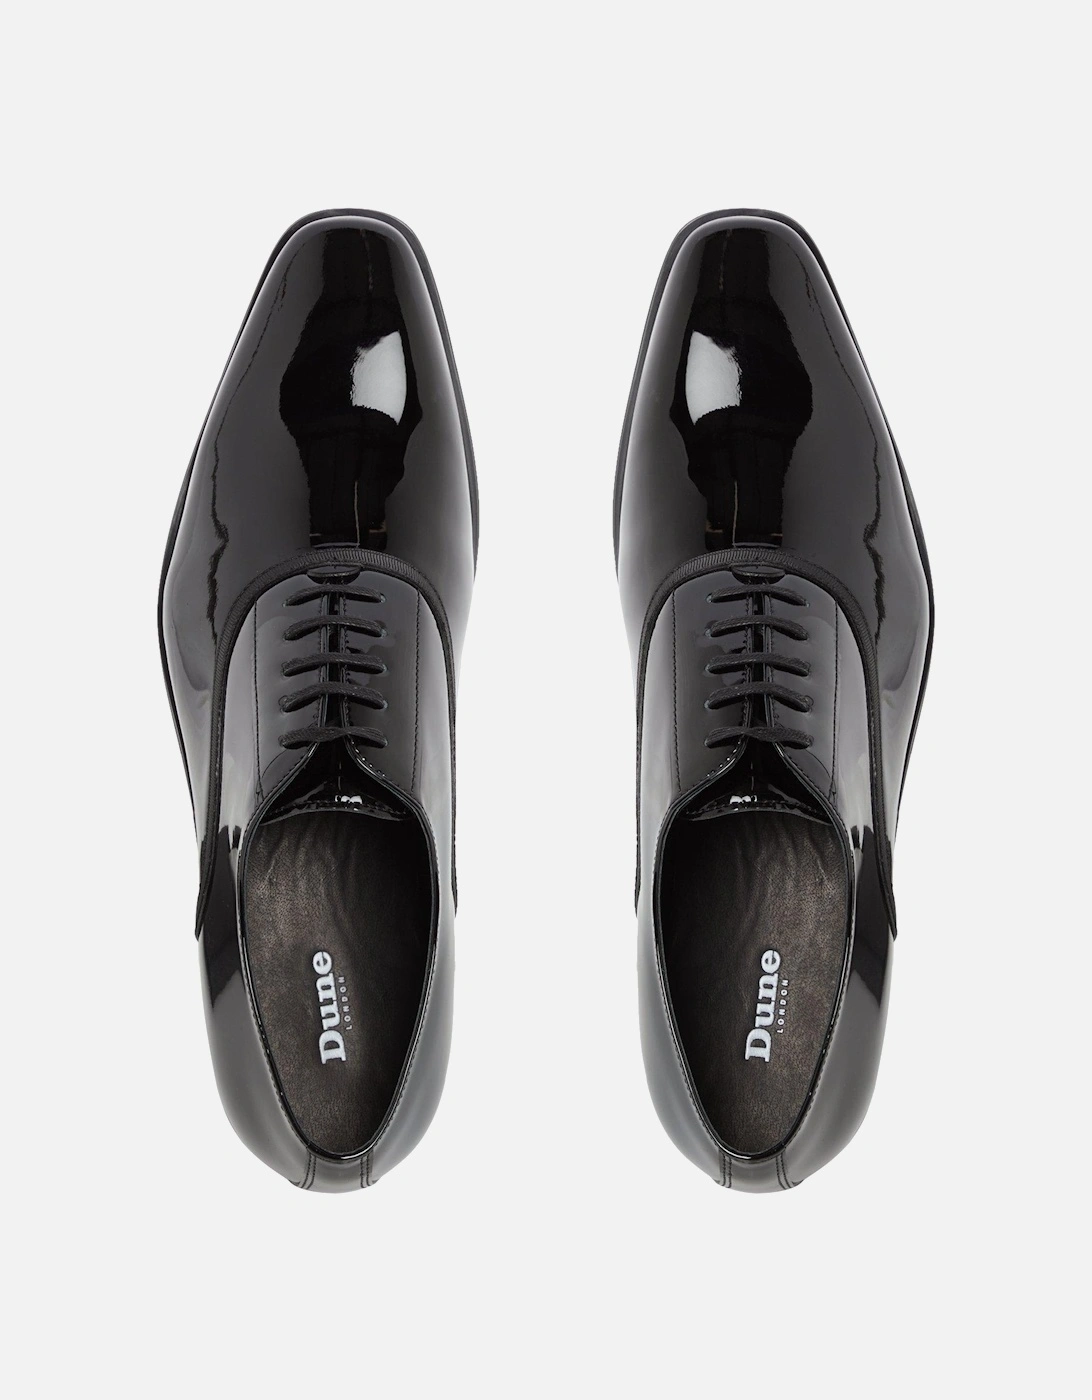 Mens Swan - Smart Patent Oxford Shoes